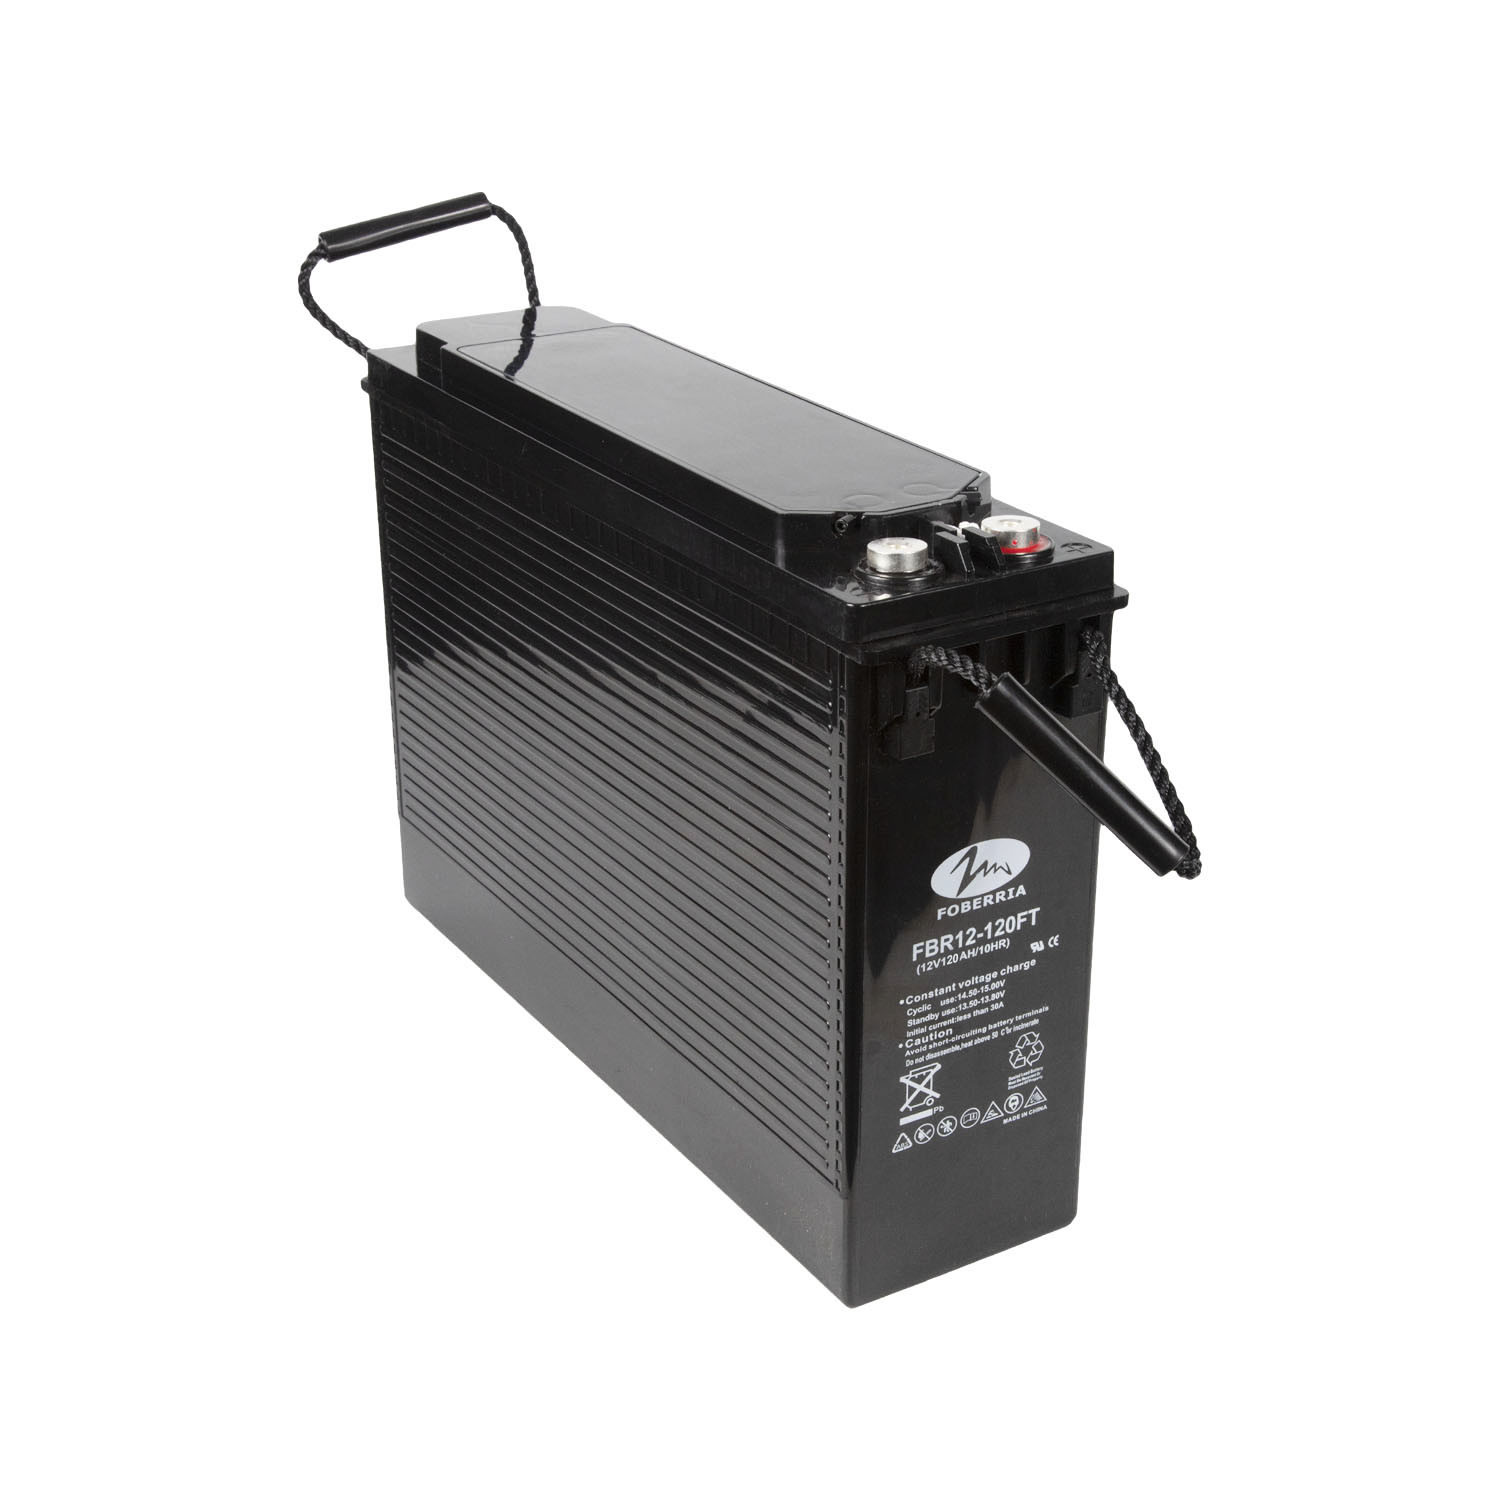  12V 120ah Agm Deep Cycle Front Terminal Battery 36kg UPS Power Supply Battery Manufactures